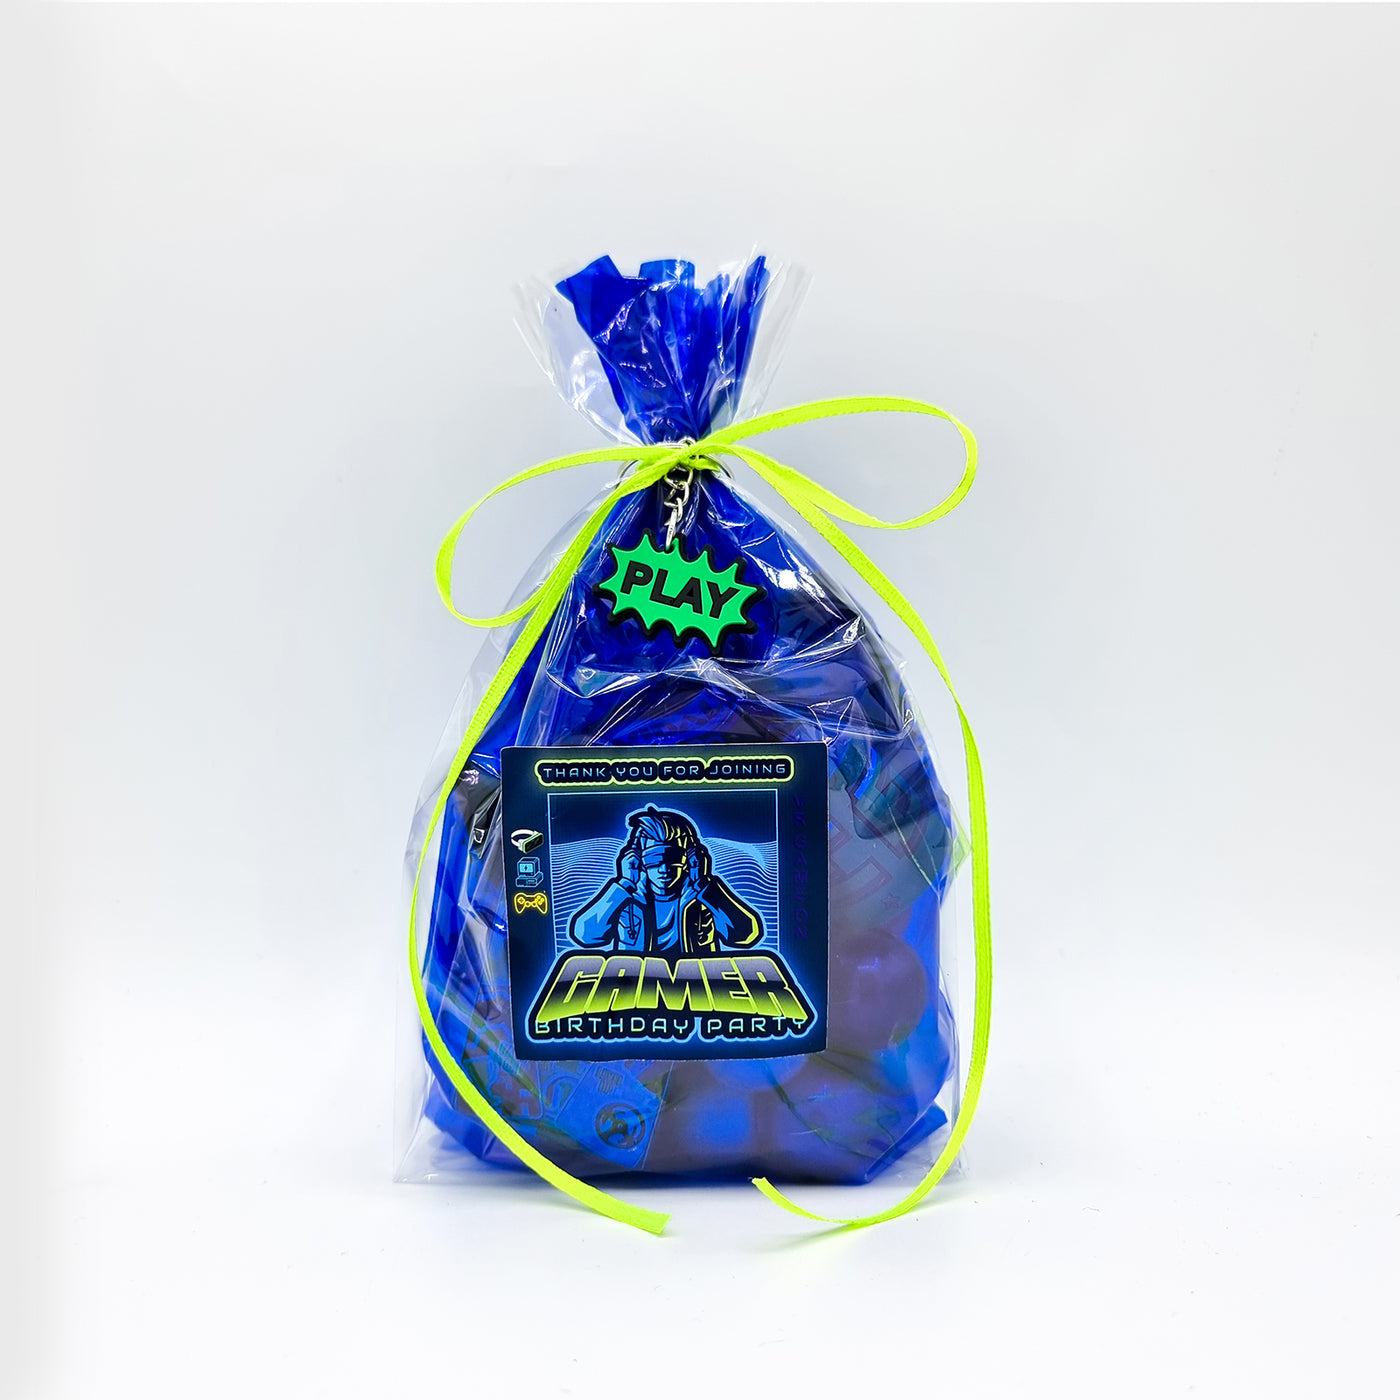 Pre Filled Blue Green Birthday Virtual Gamer Party Favours For Boys, Goody Bags With Toys And Sweets.